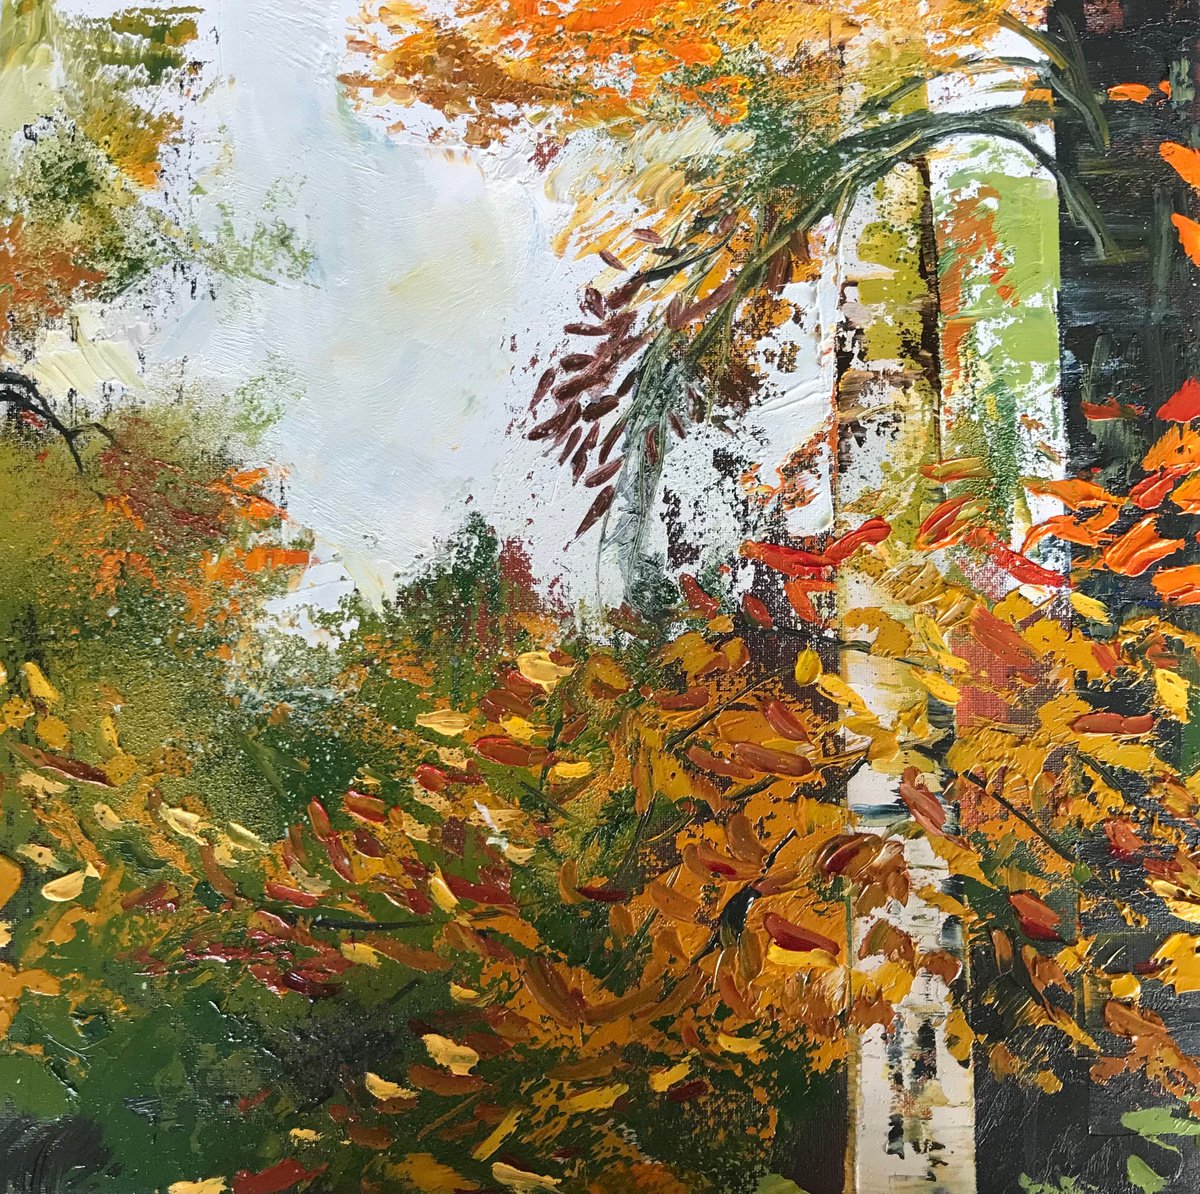 Through the Autumn Trees by Belinda Reynell